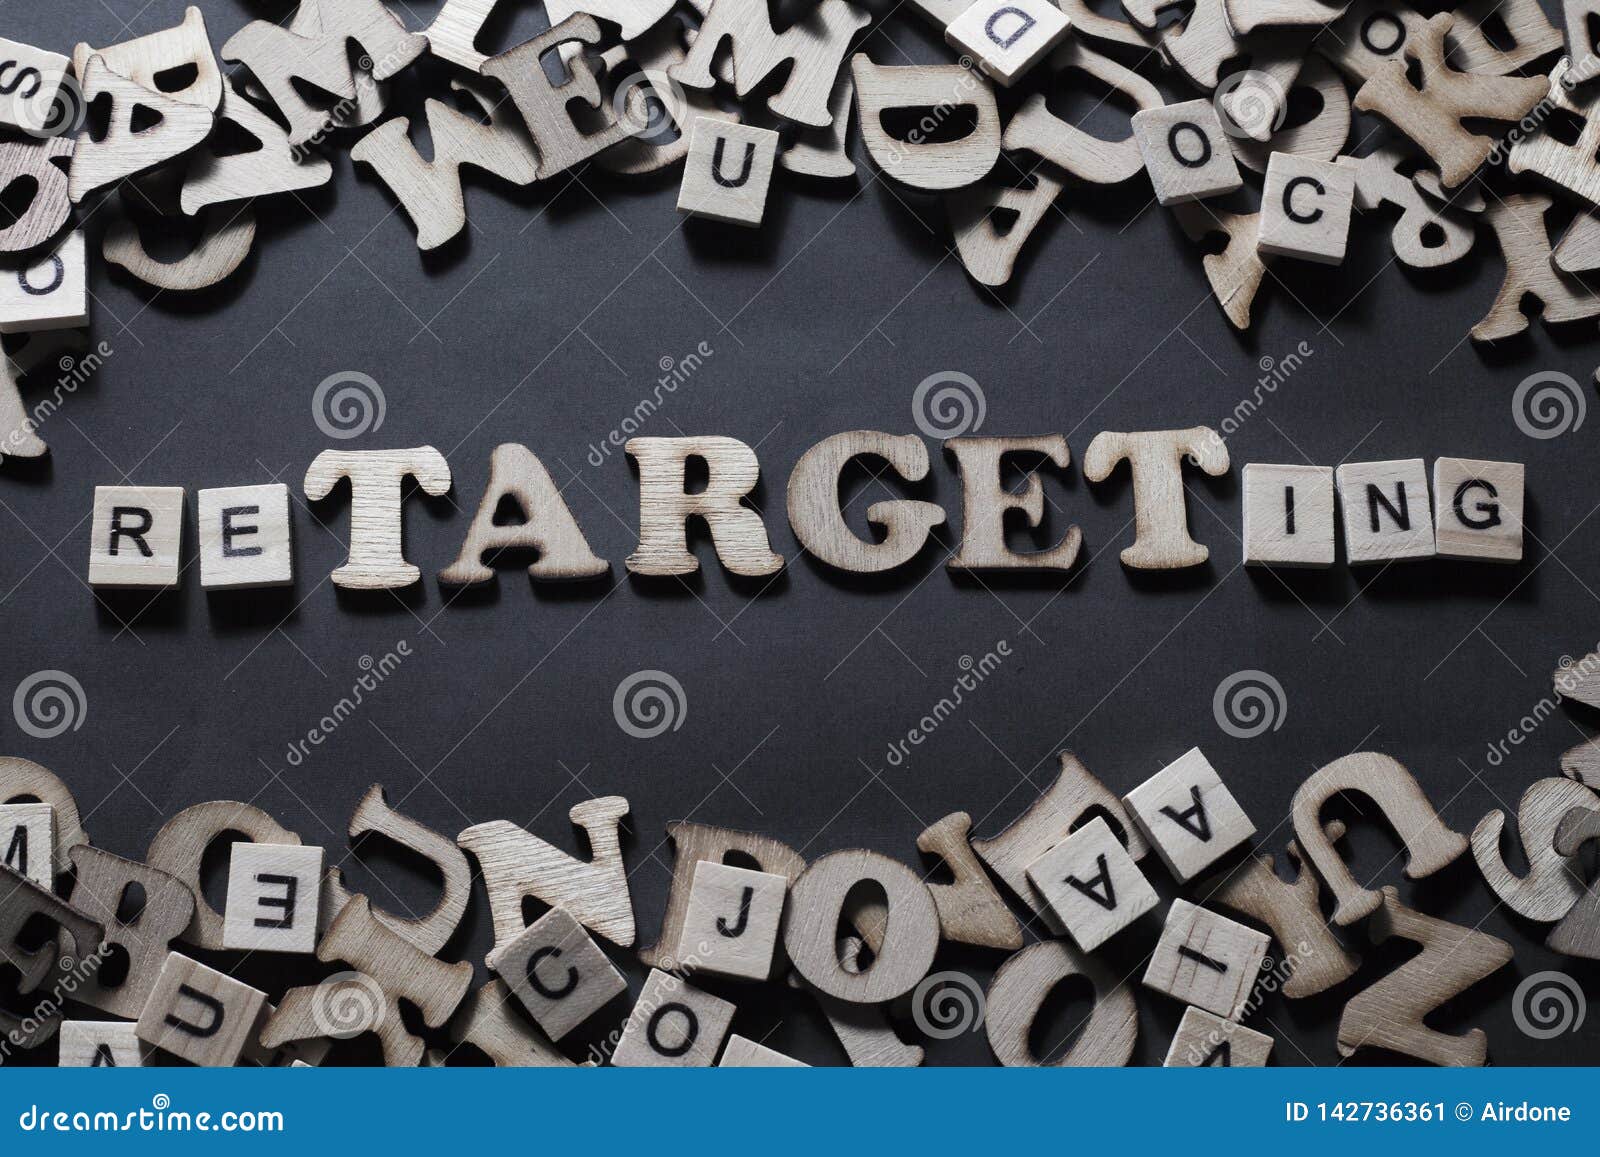 retargeting. business marketing words typography concept